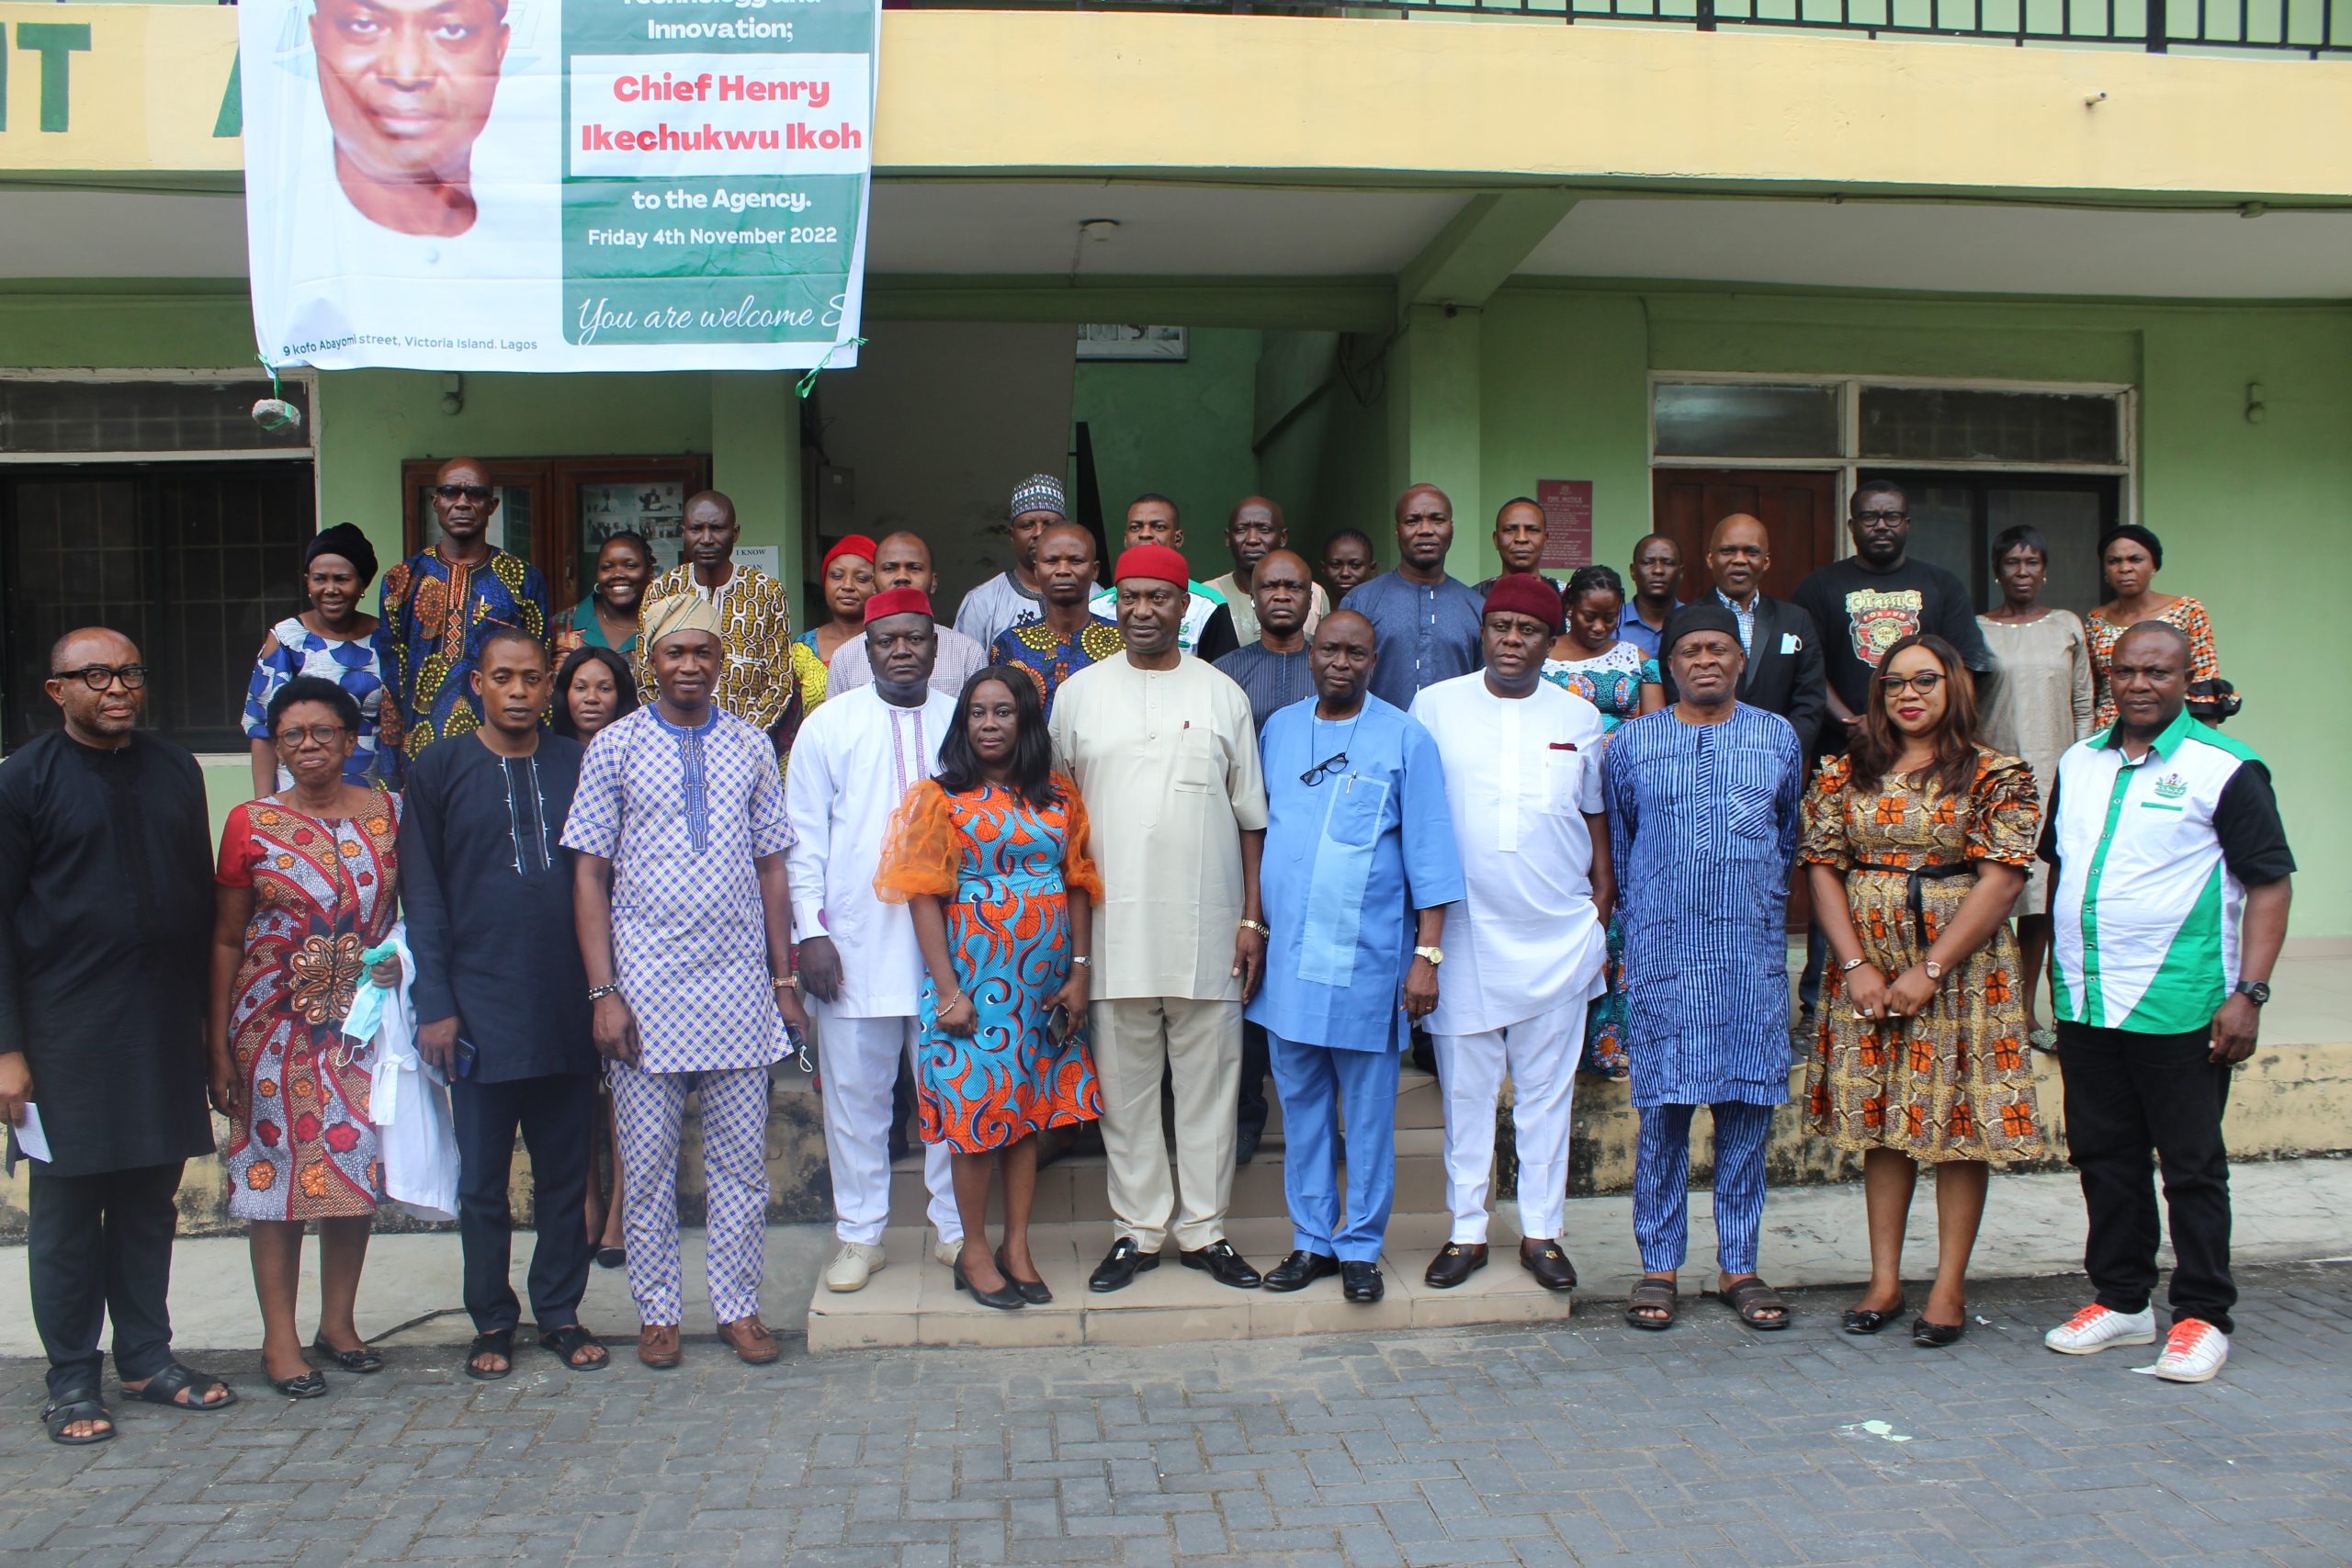 You are currently viewing The Honorable Minster of State, Federal Ministry of Science, Technology and Innovation, Chief Henry Ikechukwu Iko visits NNMDA